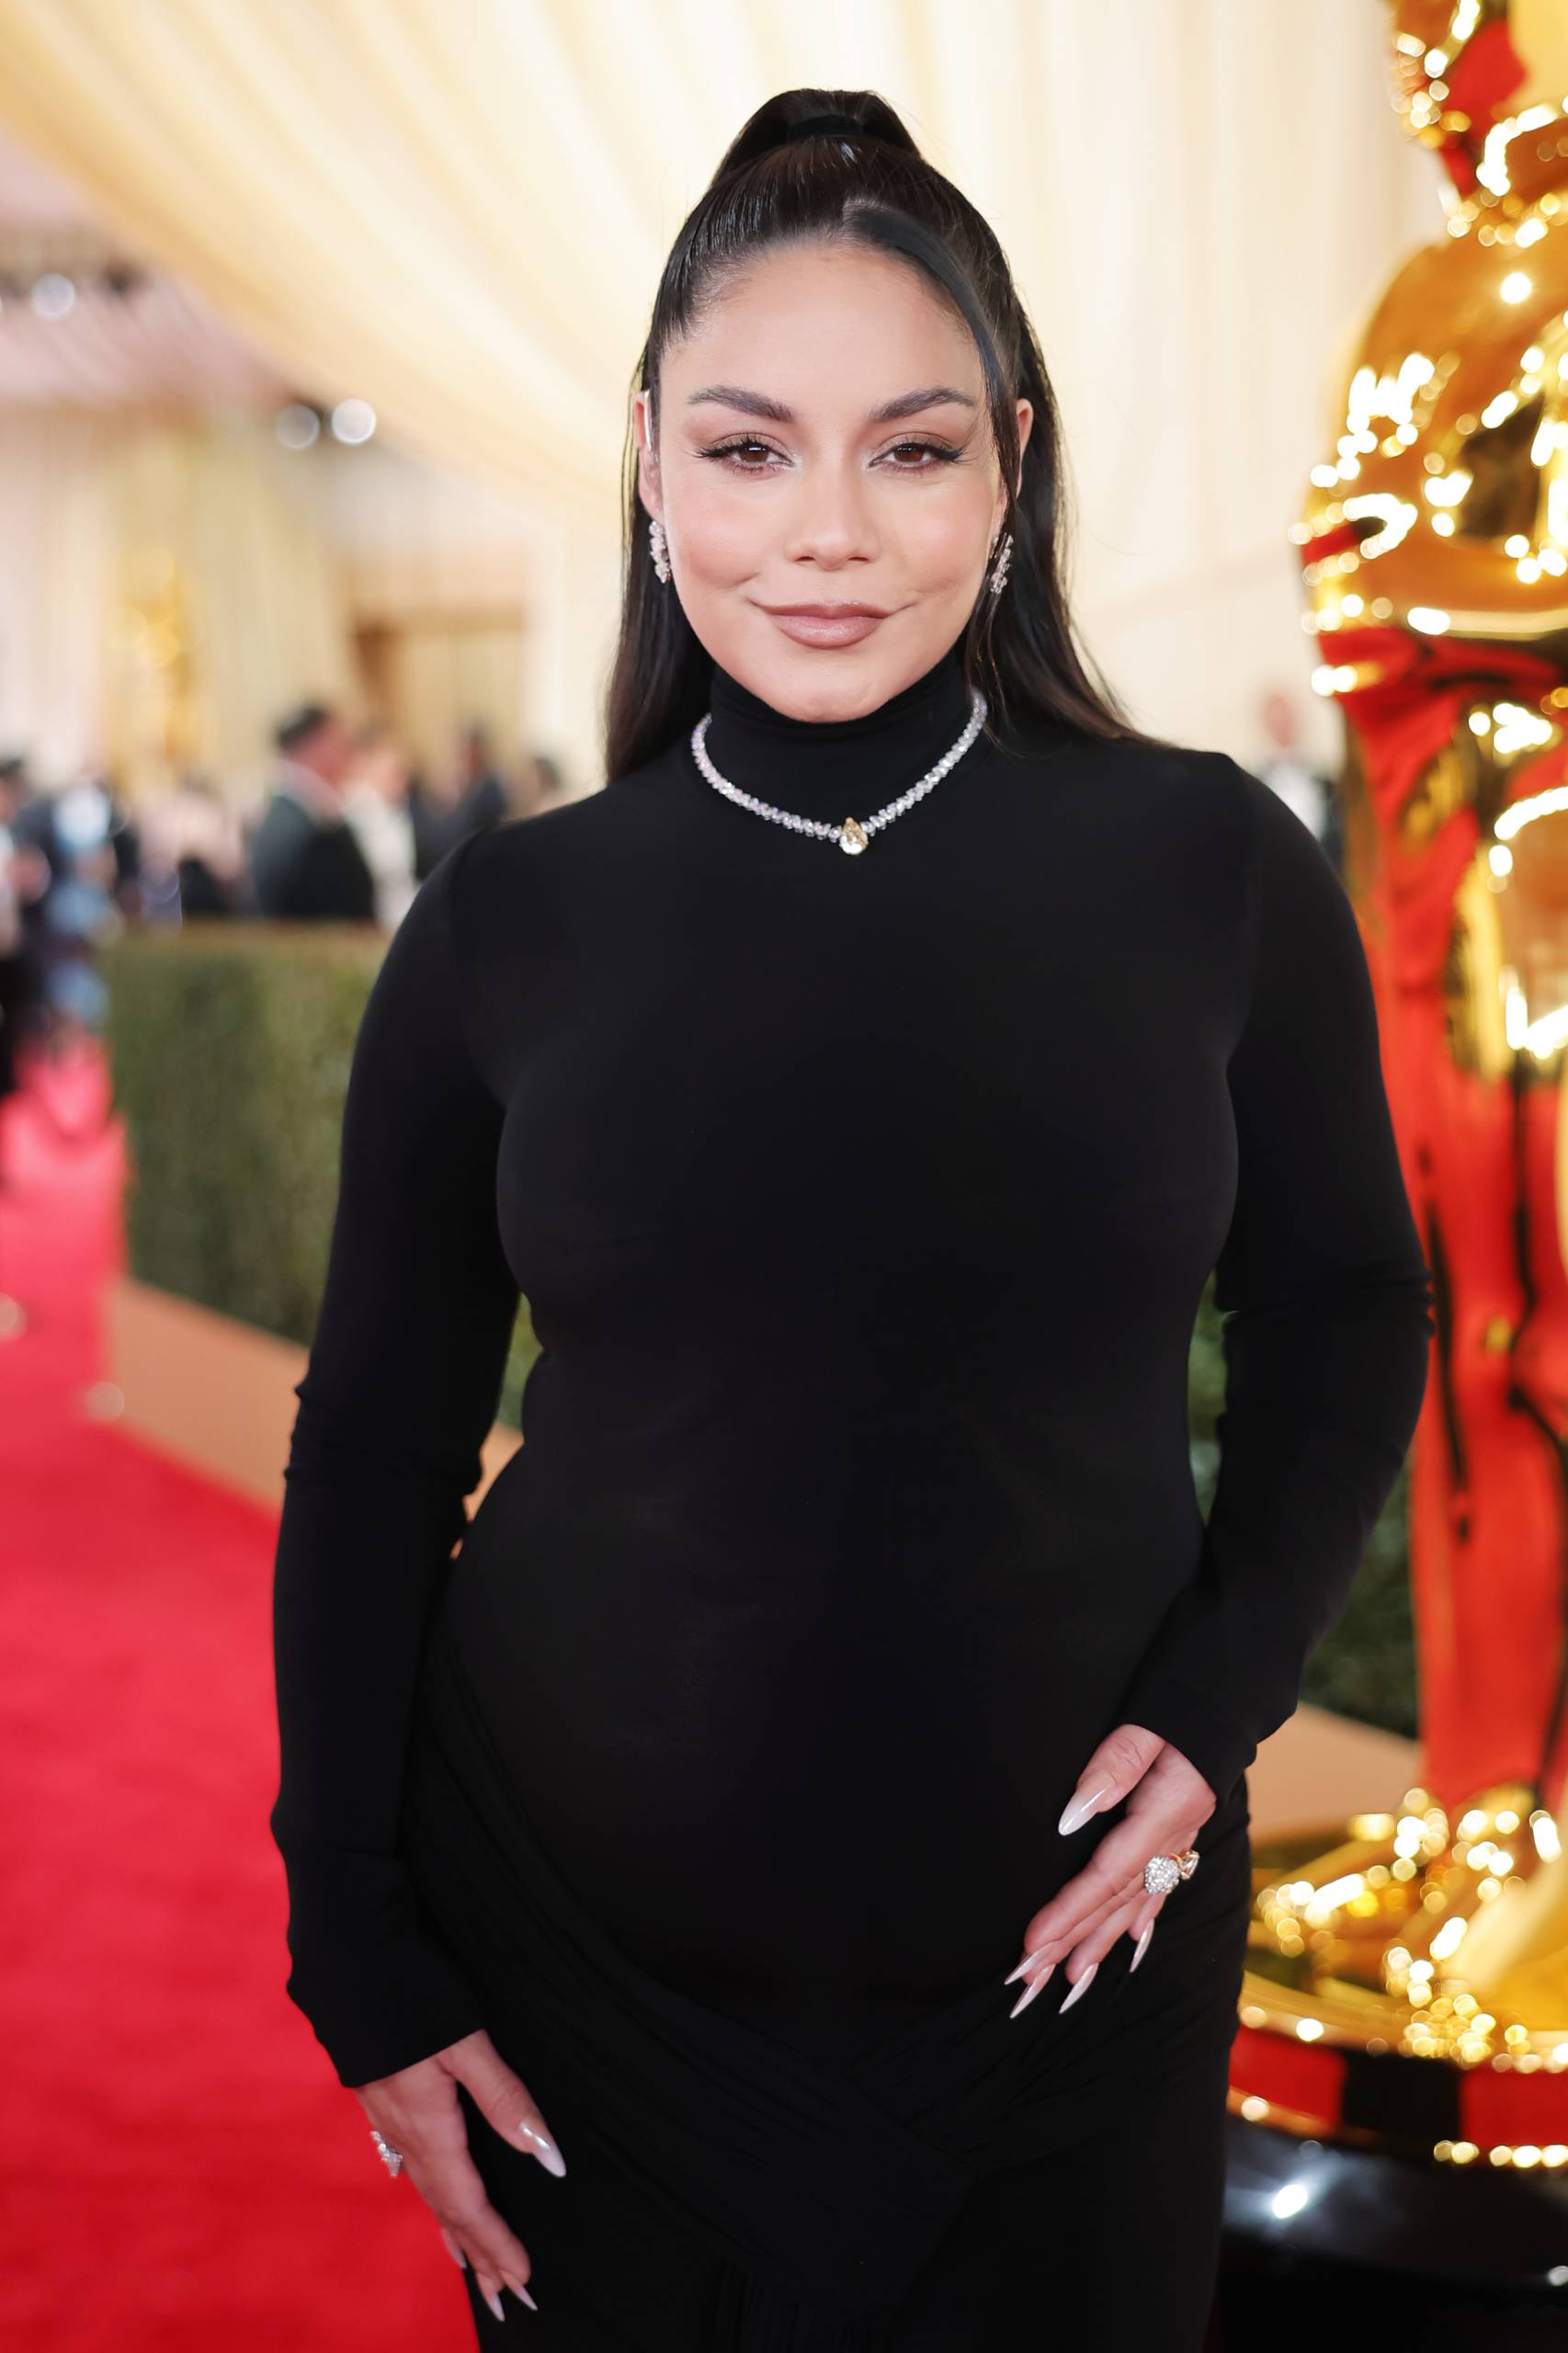 A pregnant woman wearing a black form fitting, long sleeved, high necked gown.